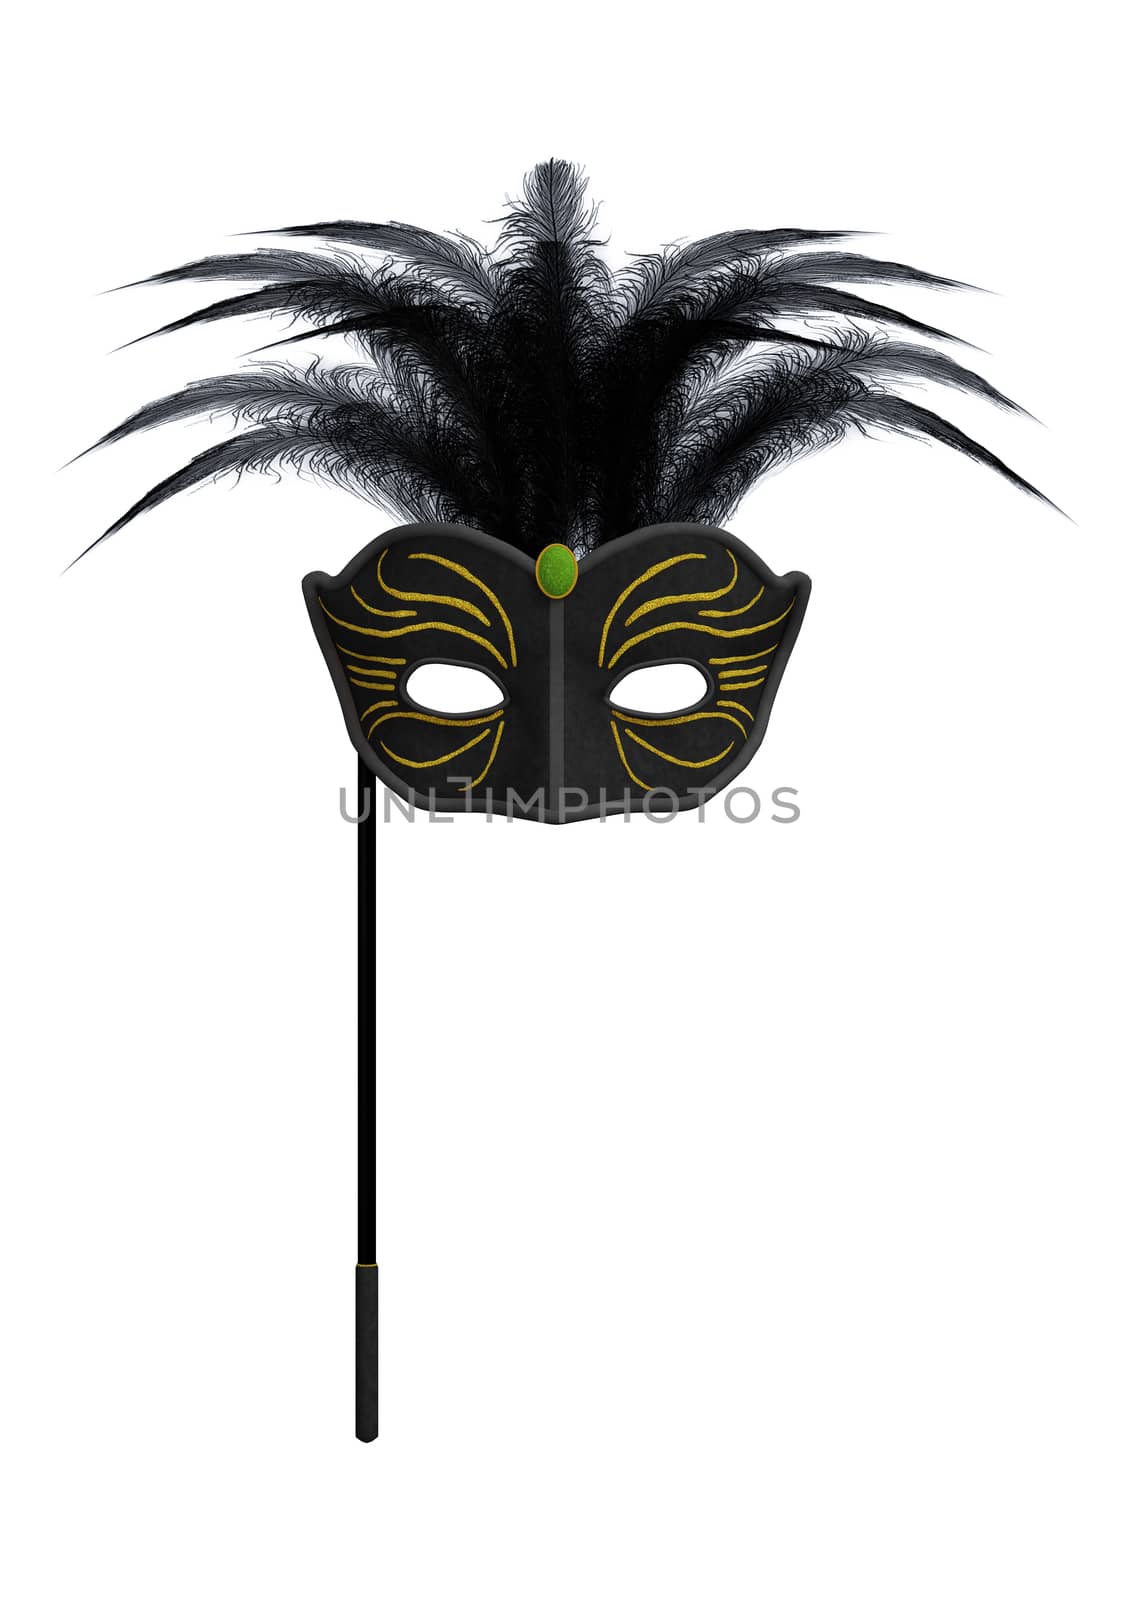 3D digital render of a black masquerade mask isolated on white background